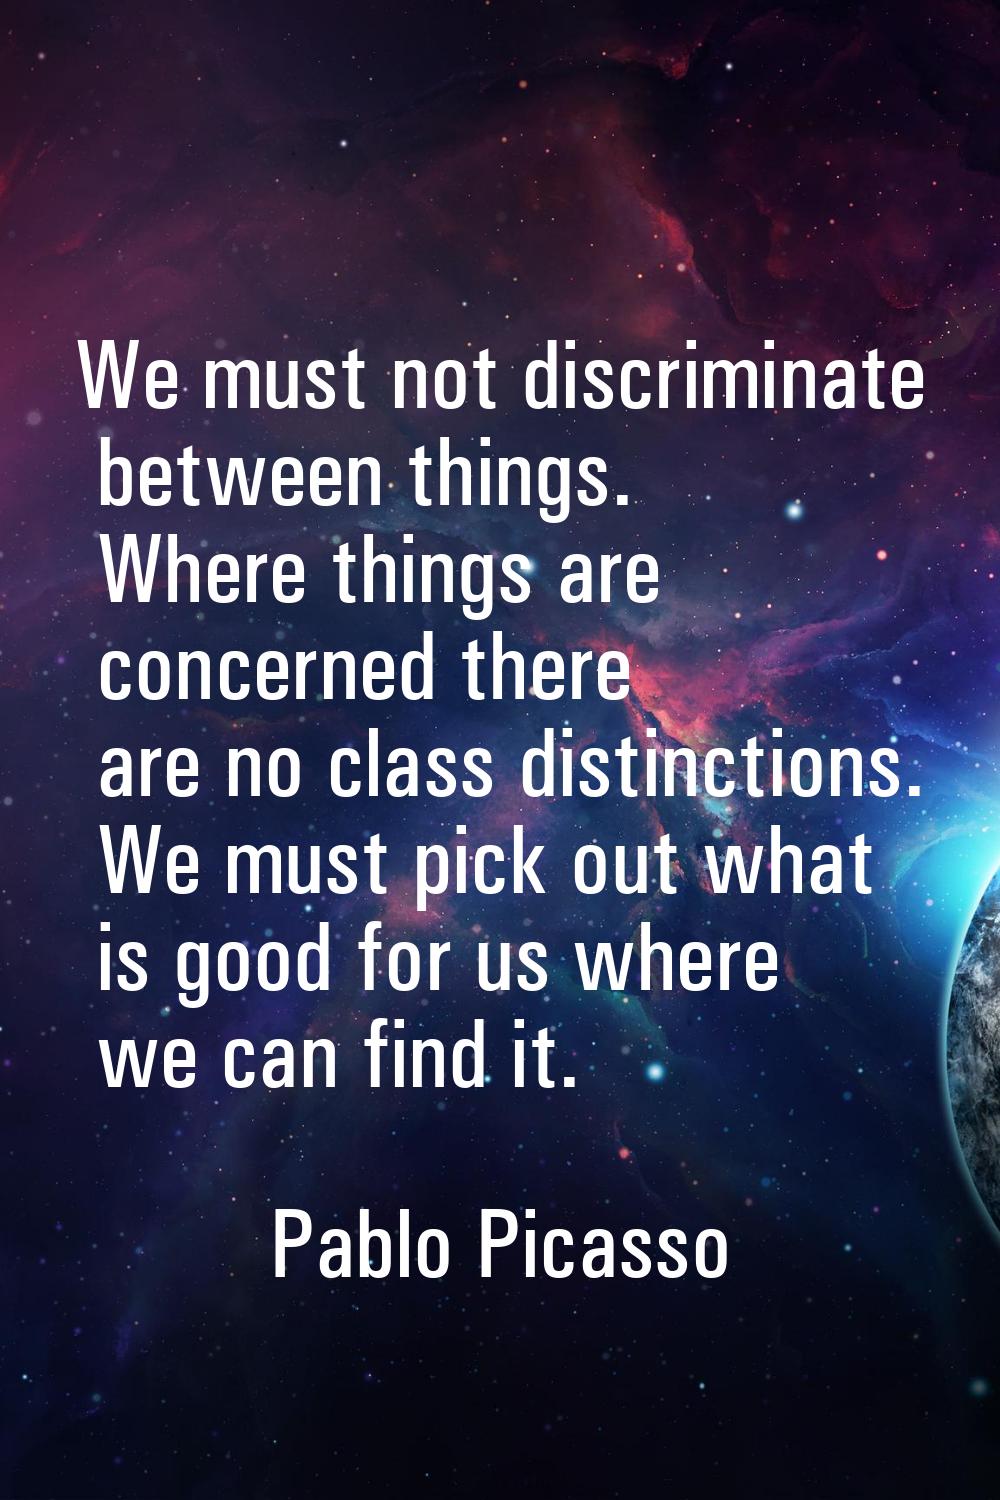 We must not discriminate between things. Where things are concerned there are no class distinctions